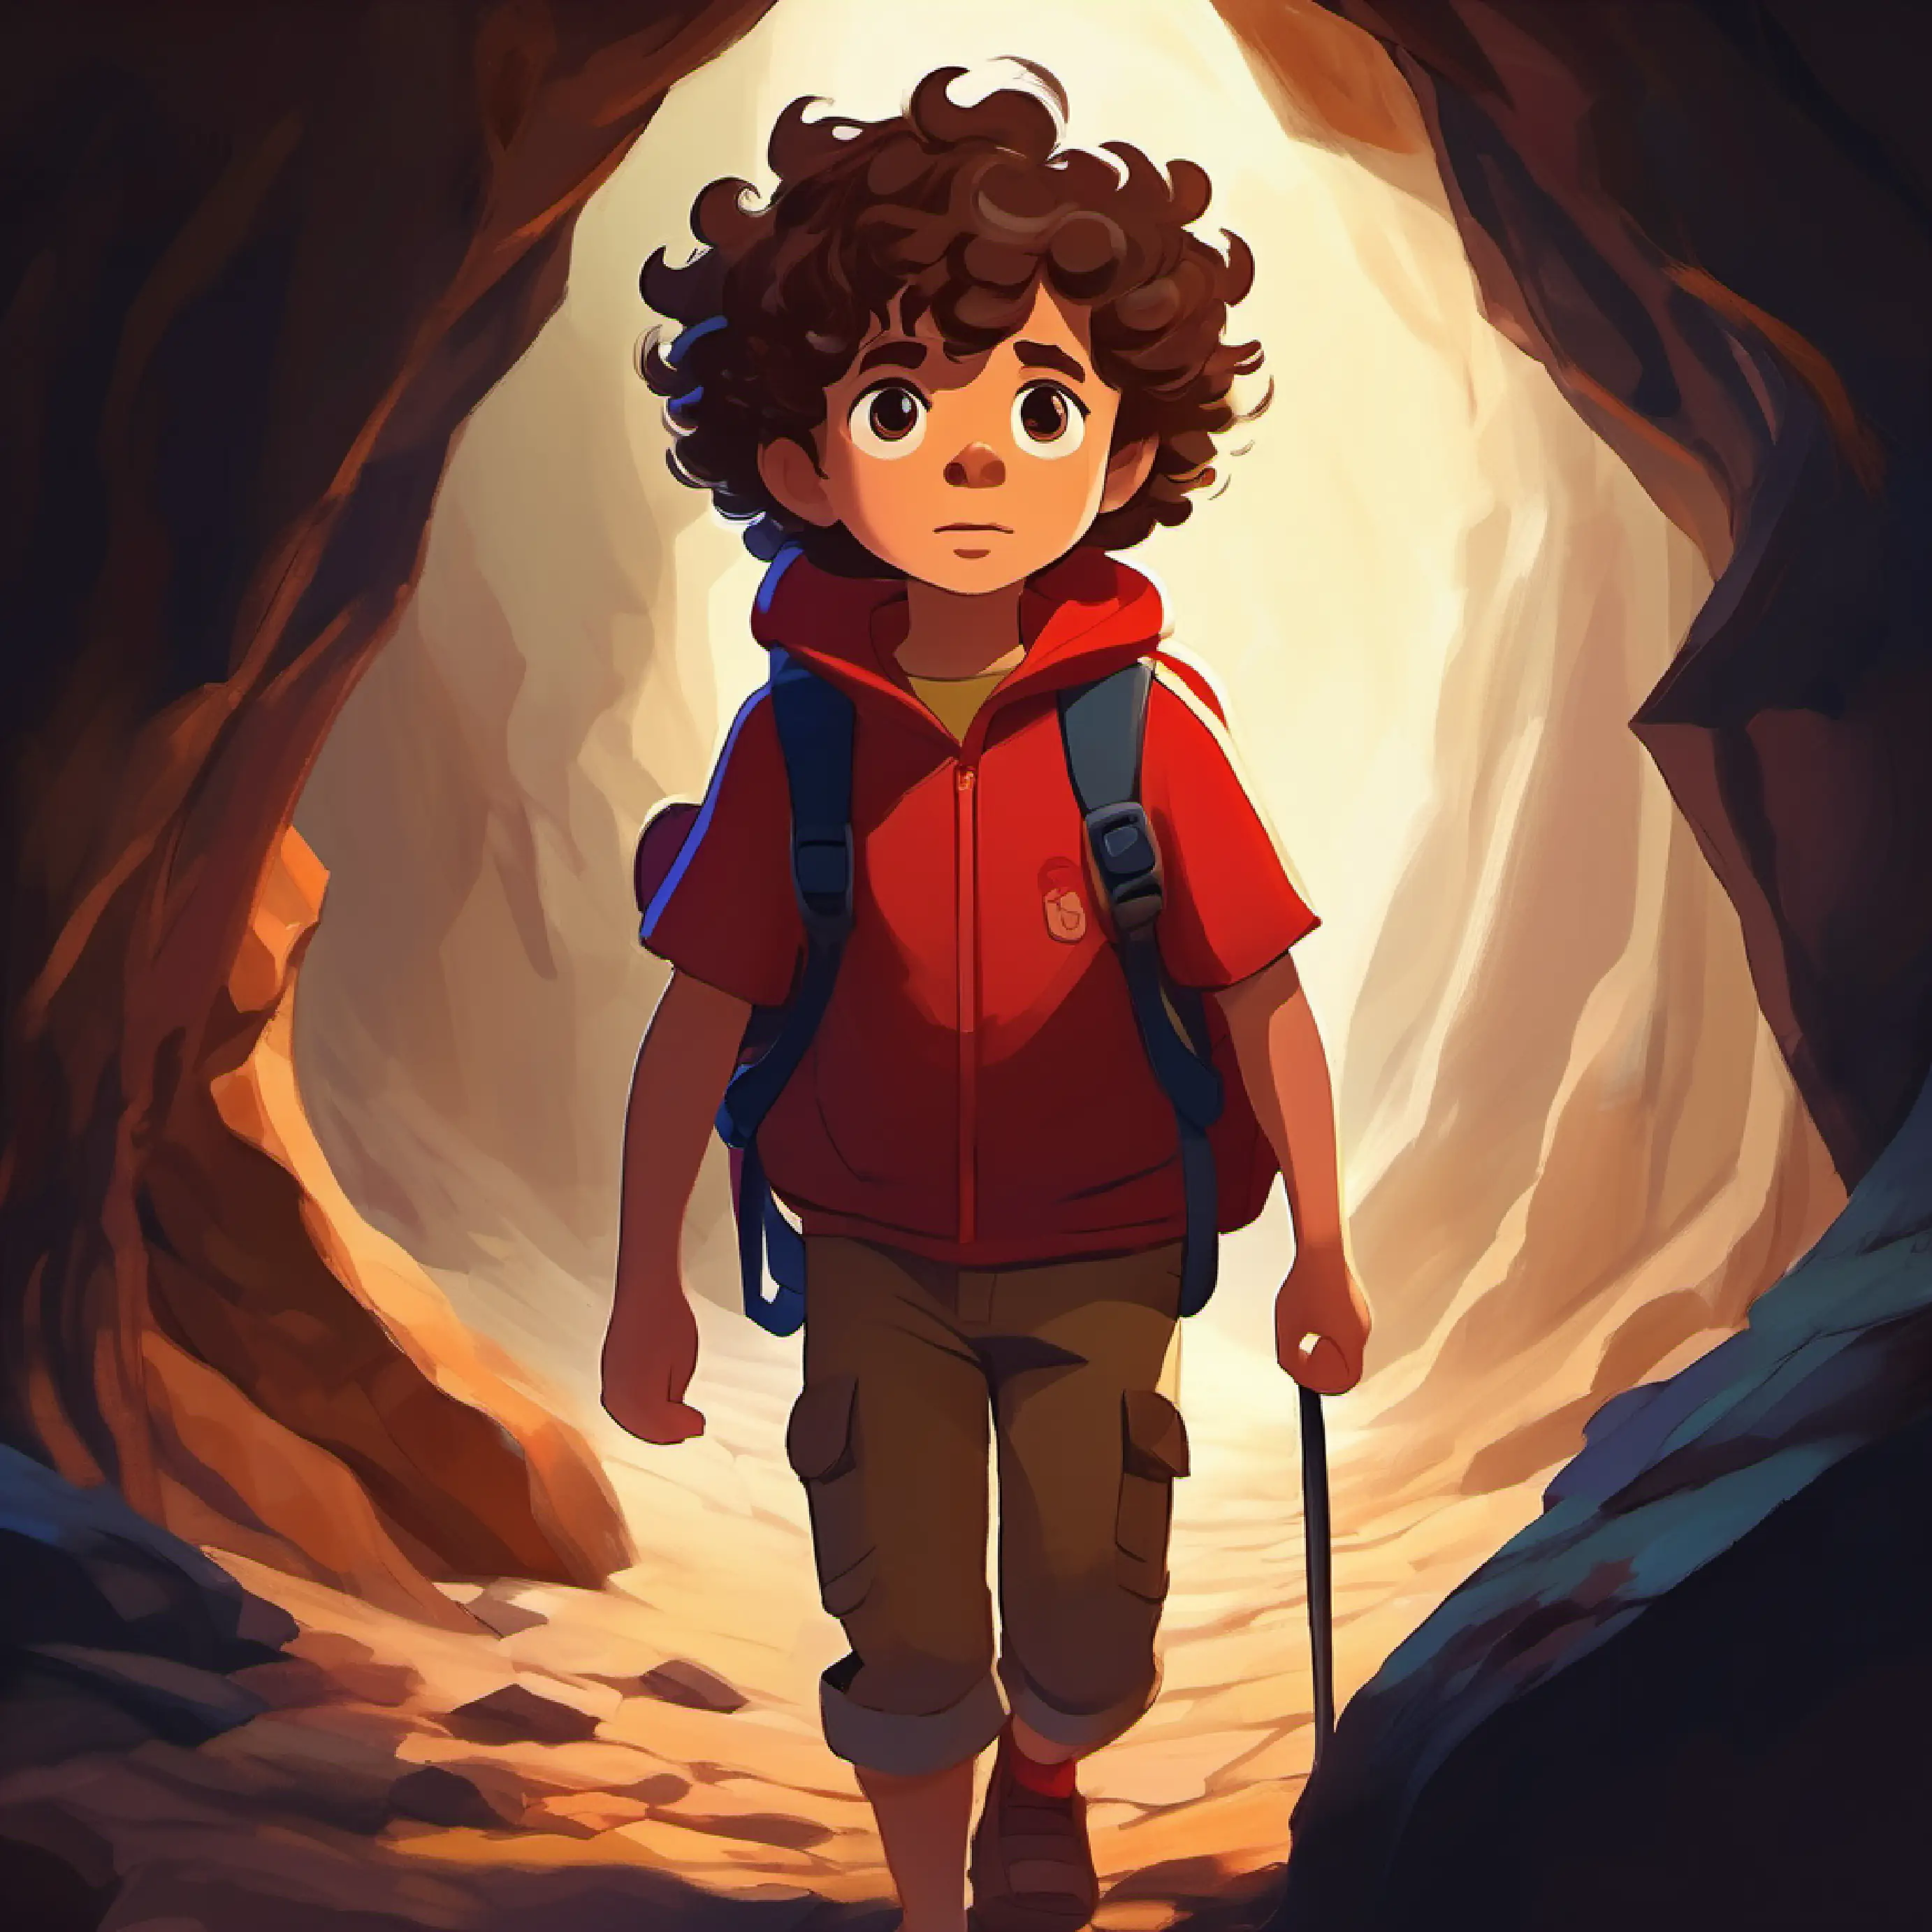 A small boy, curly brown hair, bright brown eyes, always carrying a red backpack enters the dark cave and faces spooky shadows